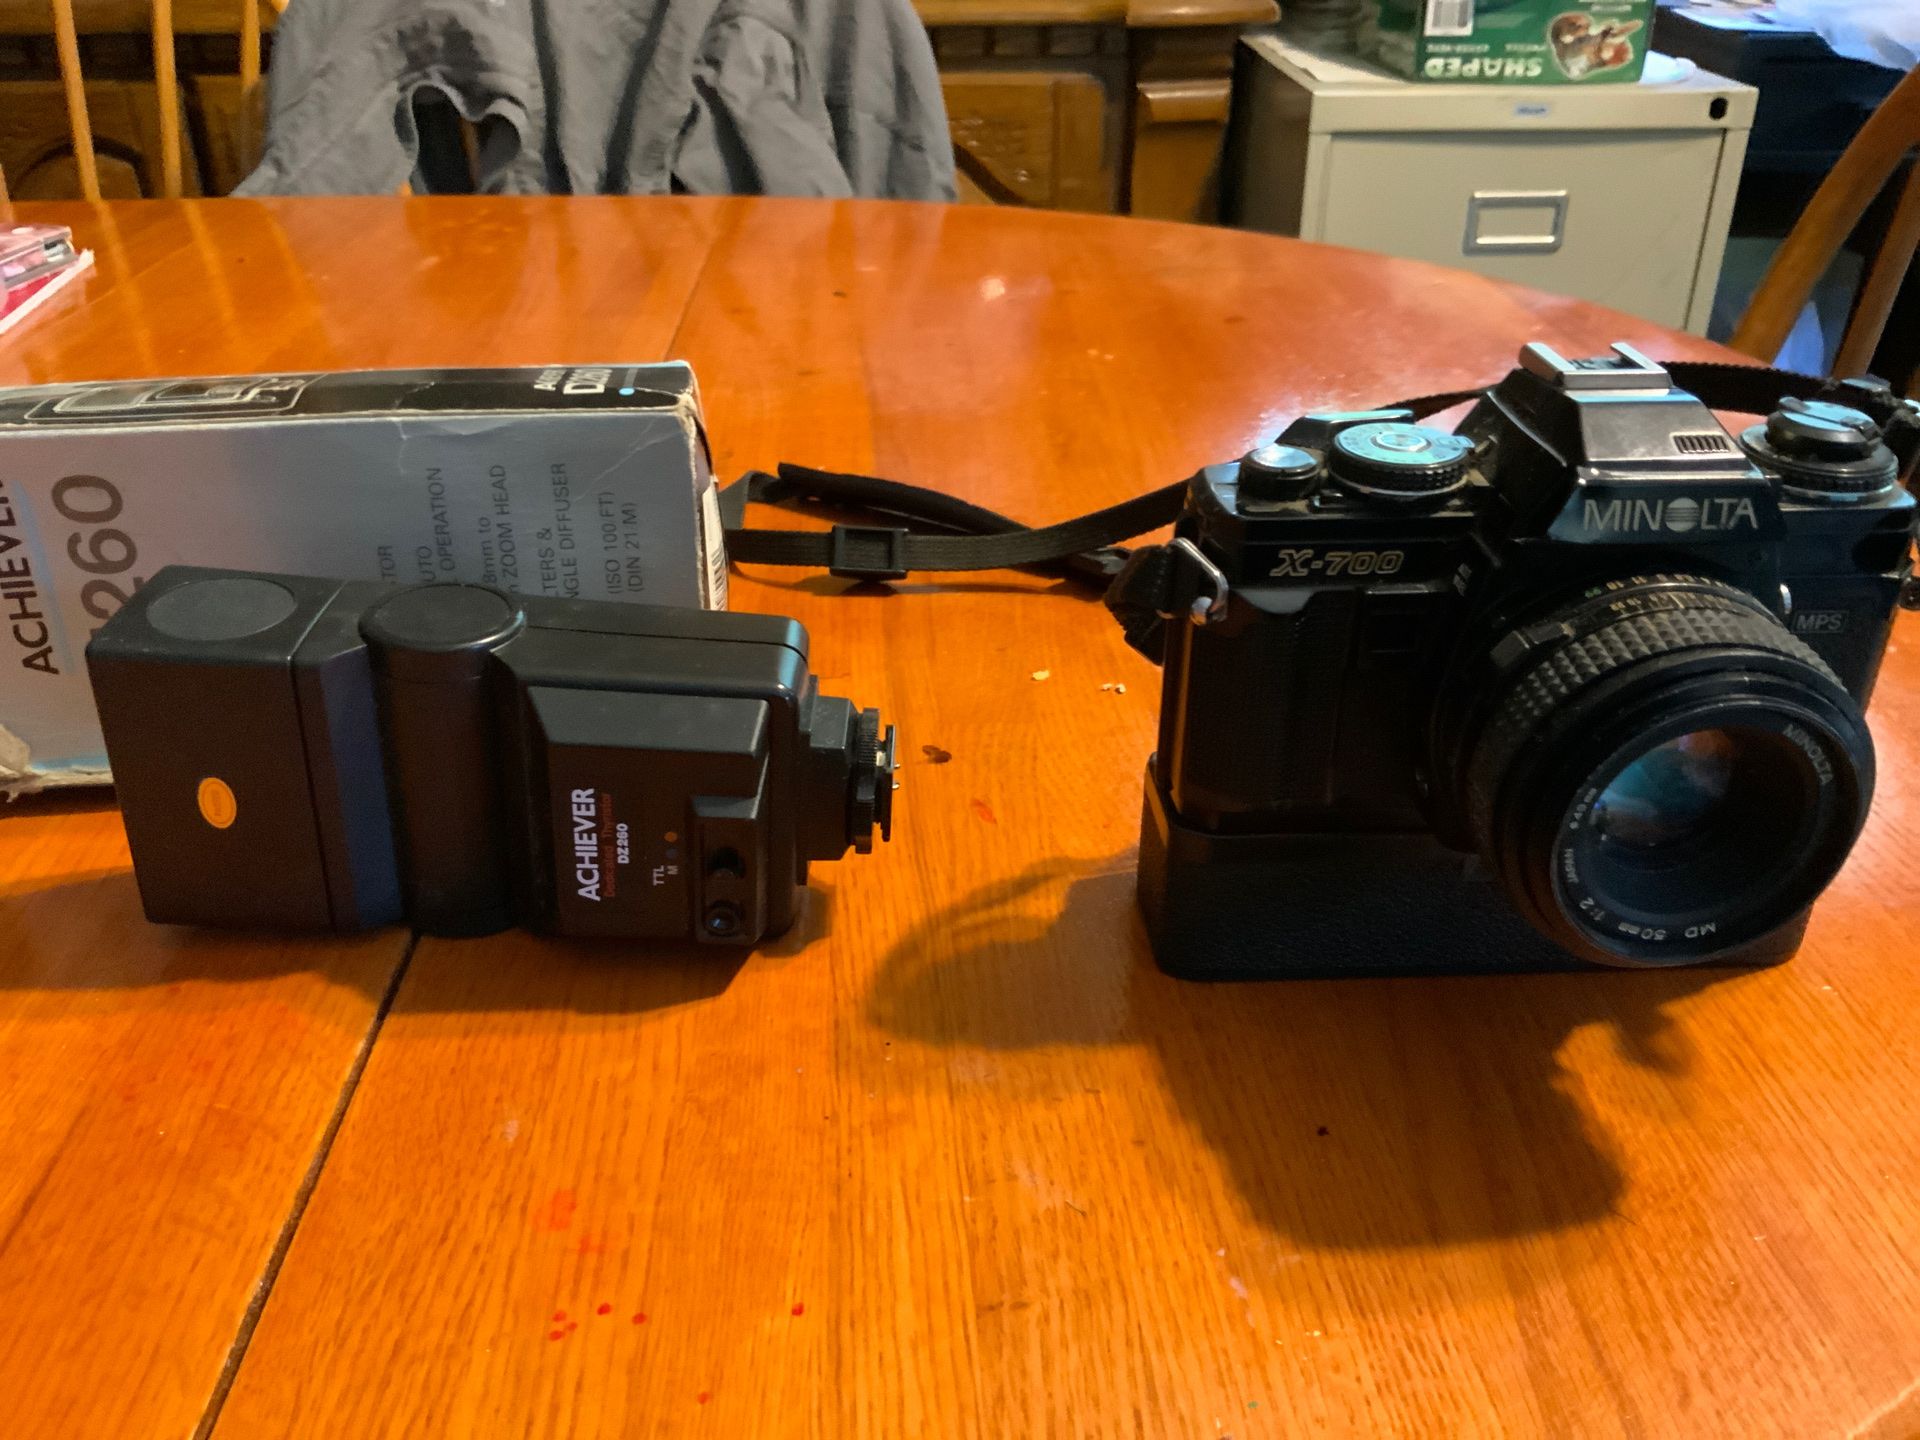 Minolta X700 with flash & fast winder for action shots